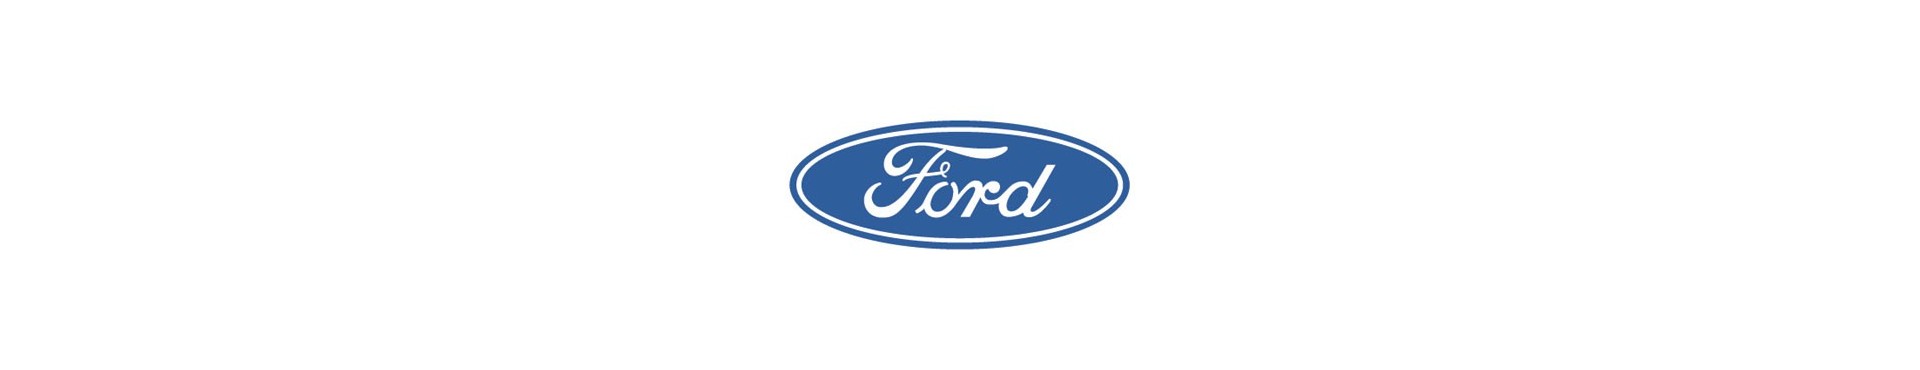 Pour Ford